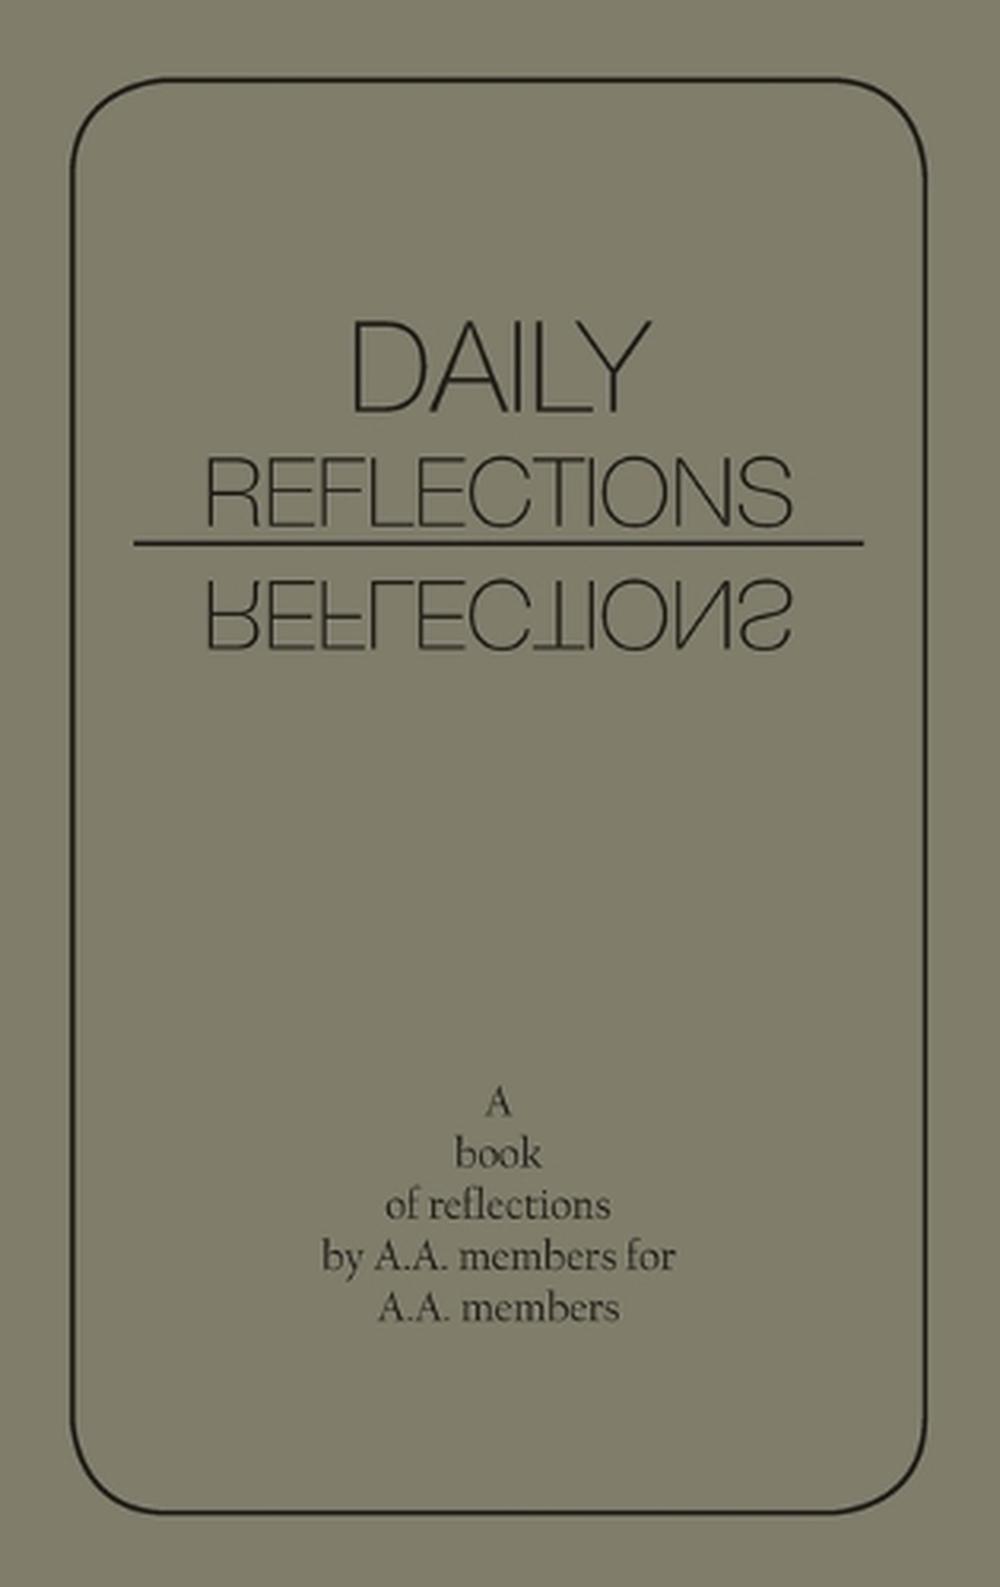 aa daily reflection april 11